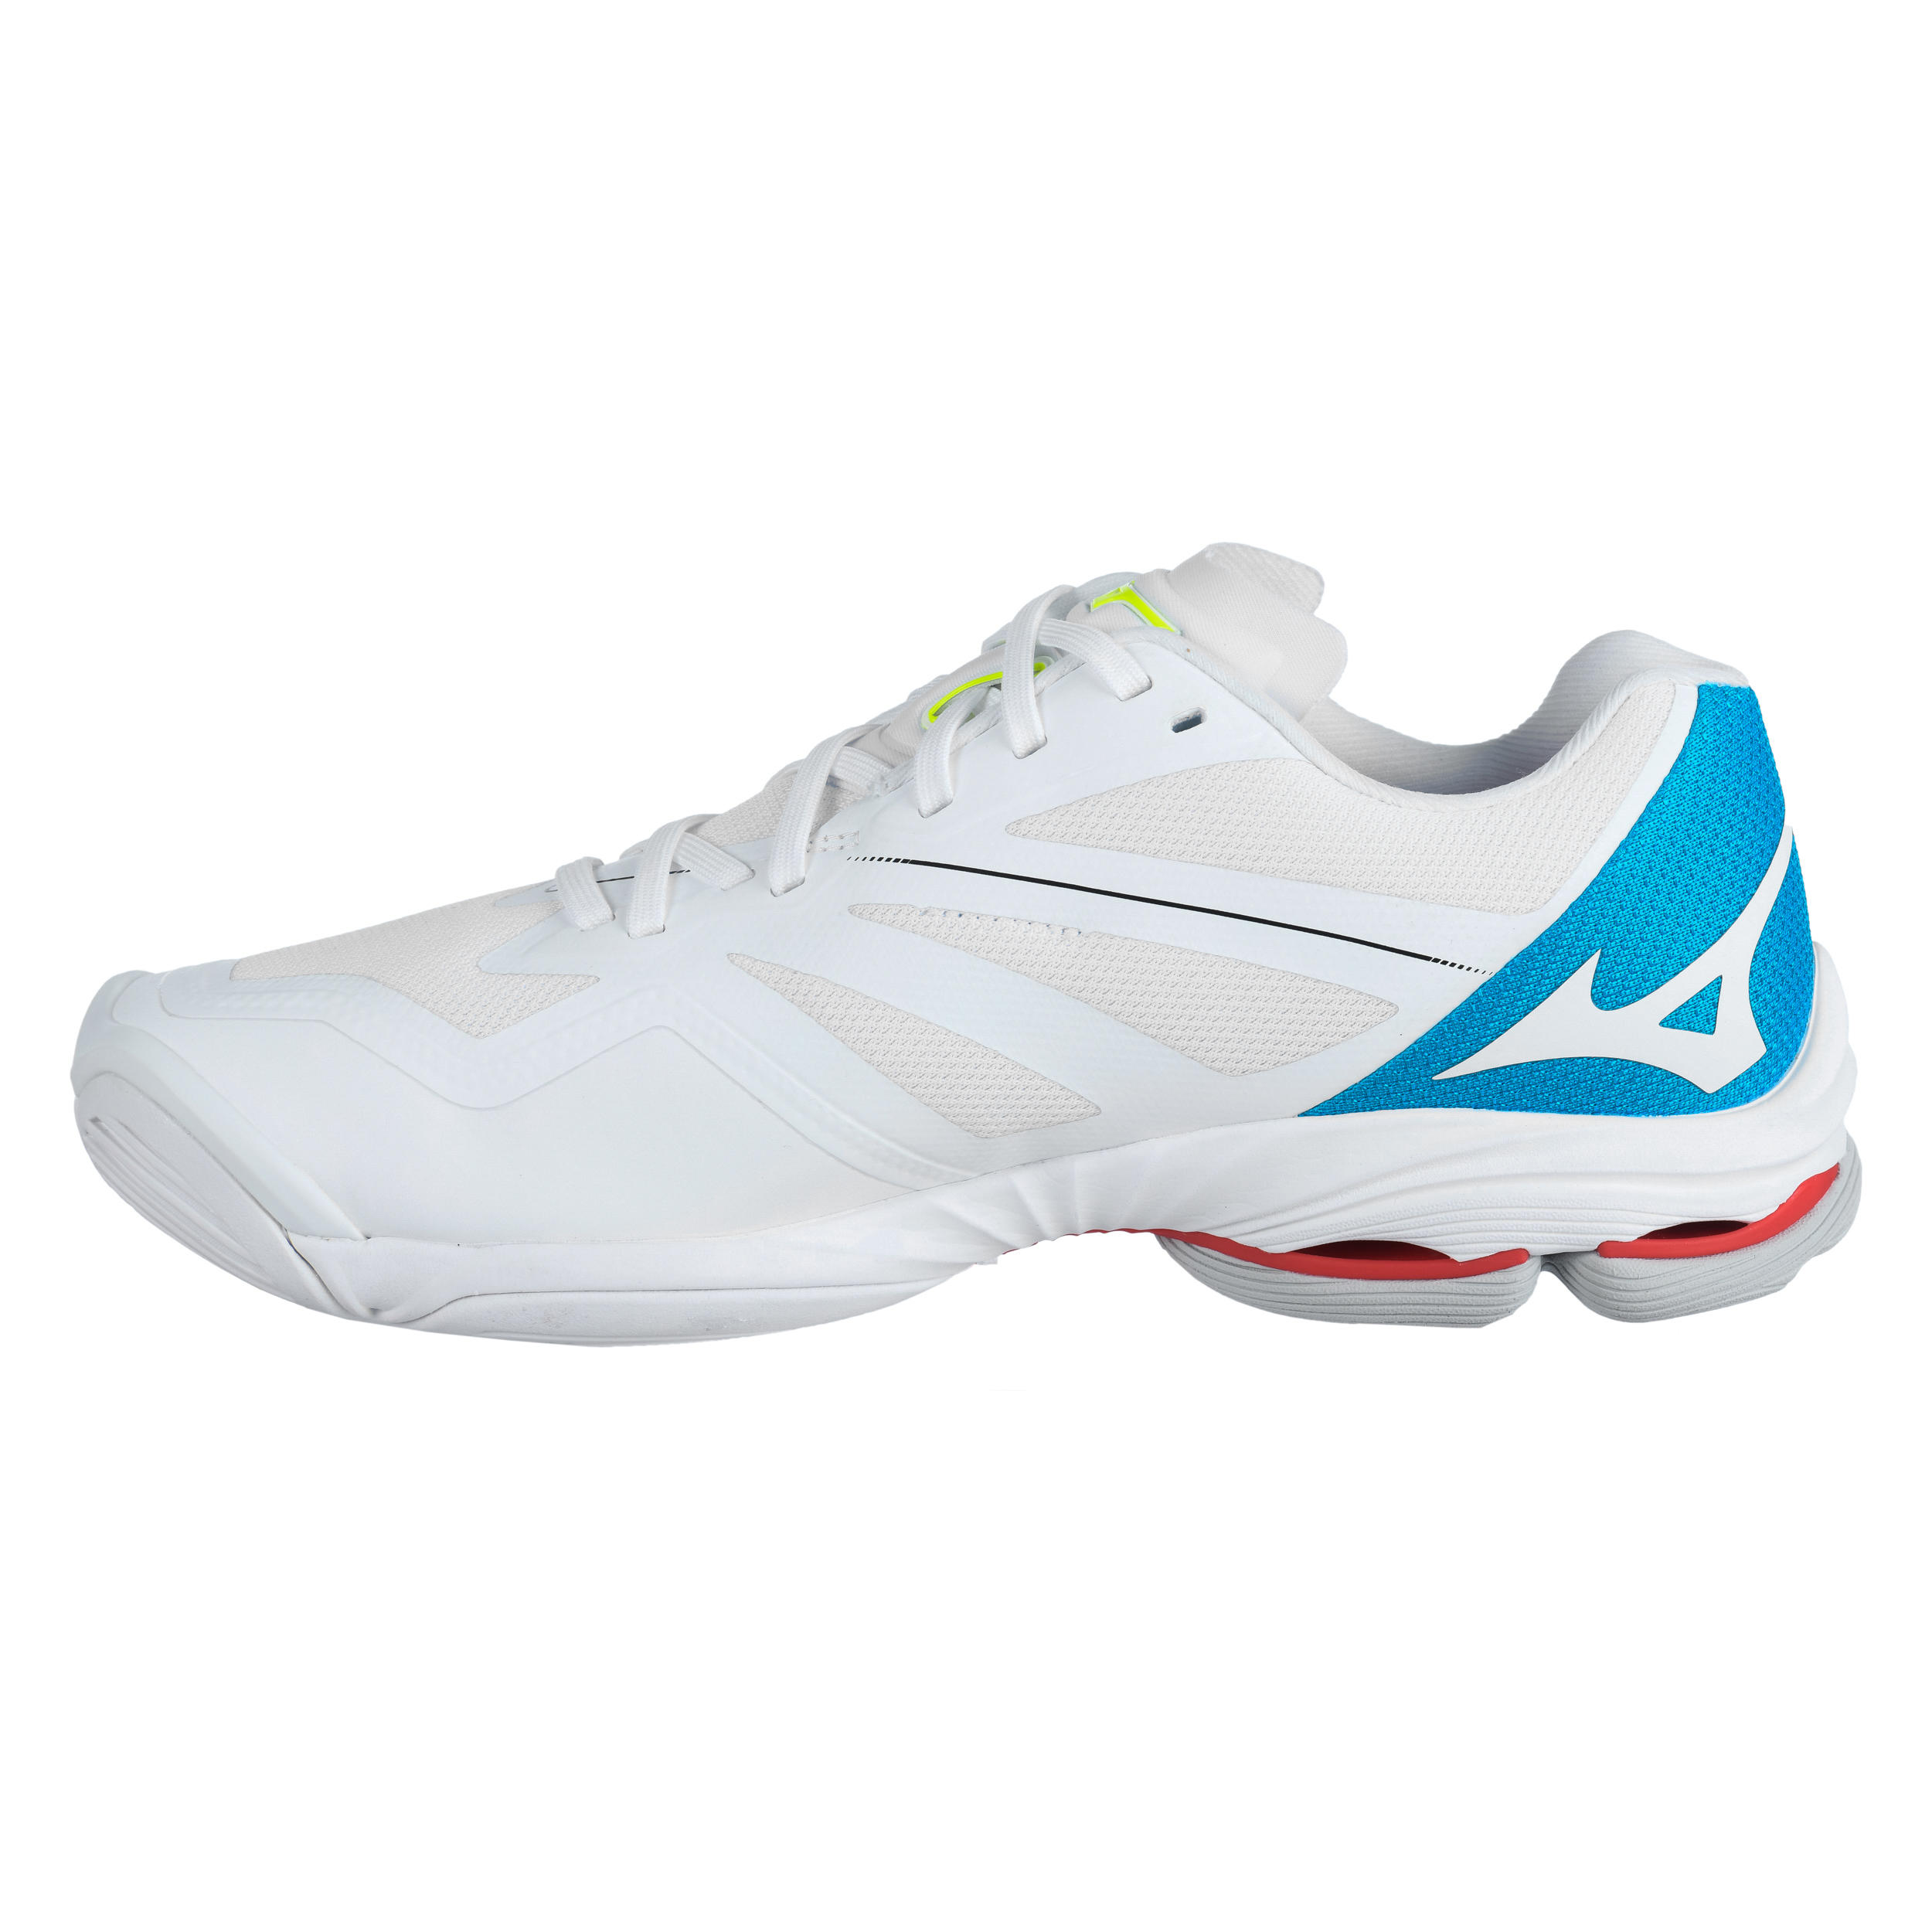 Men's Volleyball Shoes Lightning Z6 - White 2/8